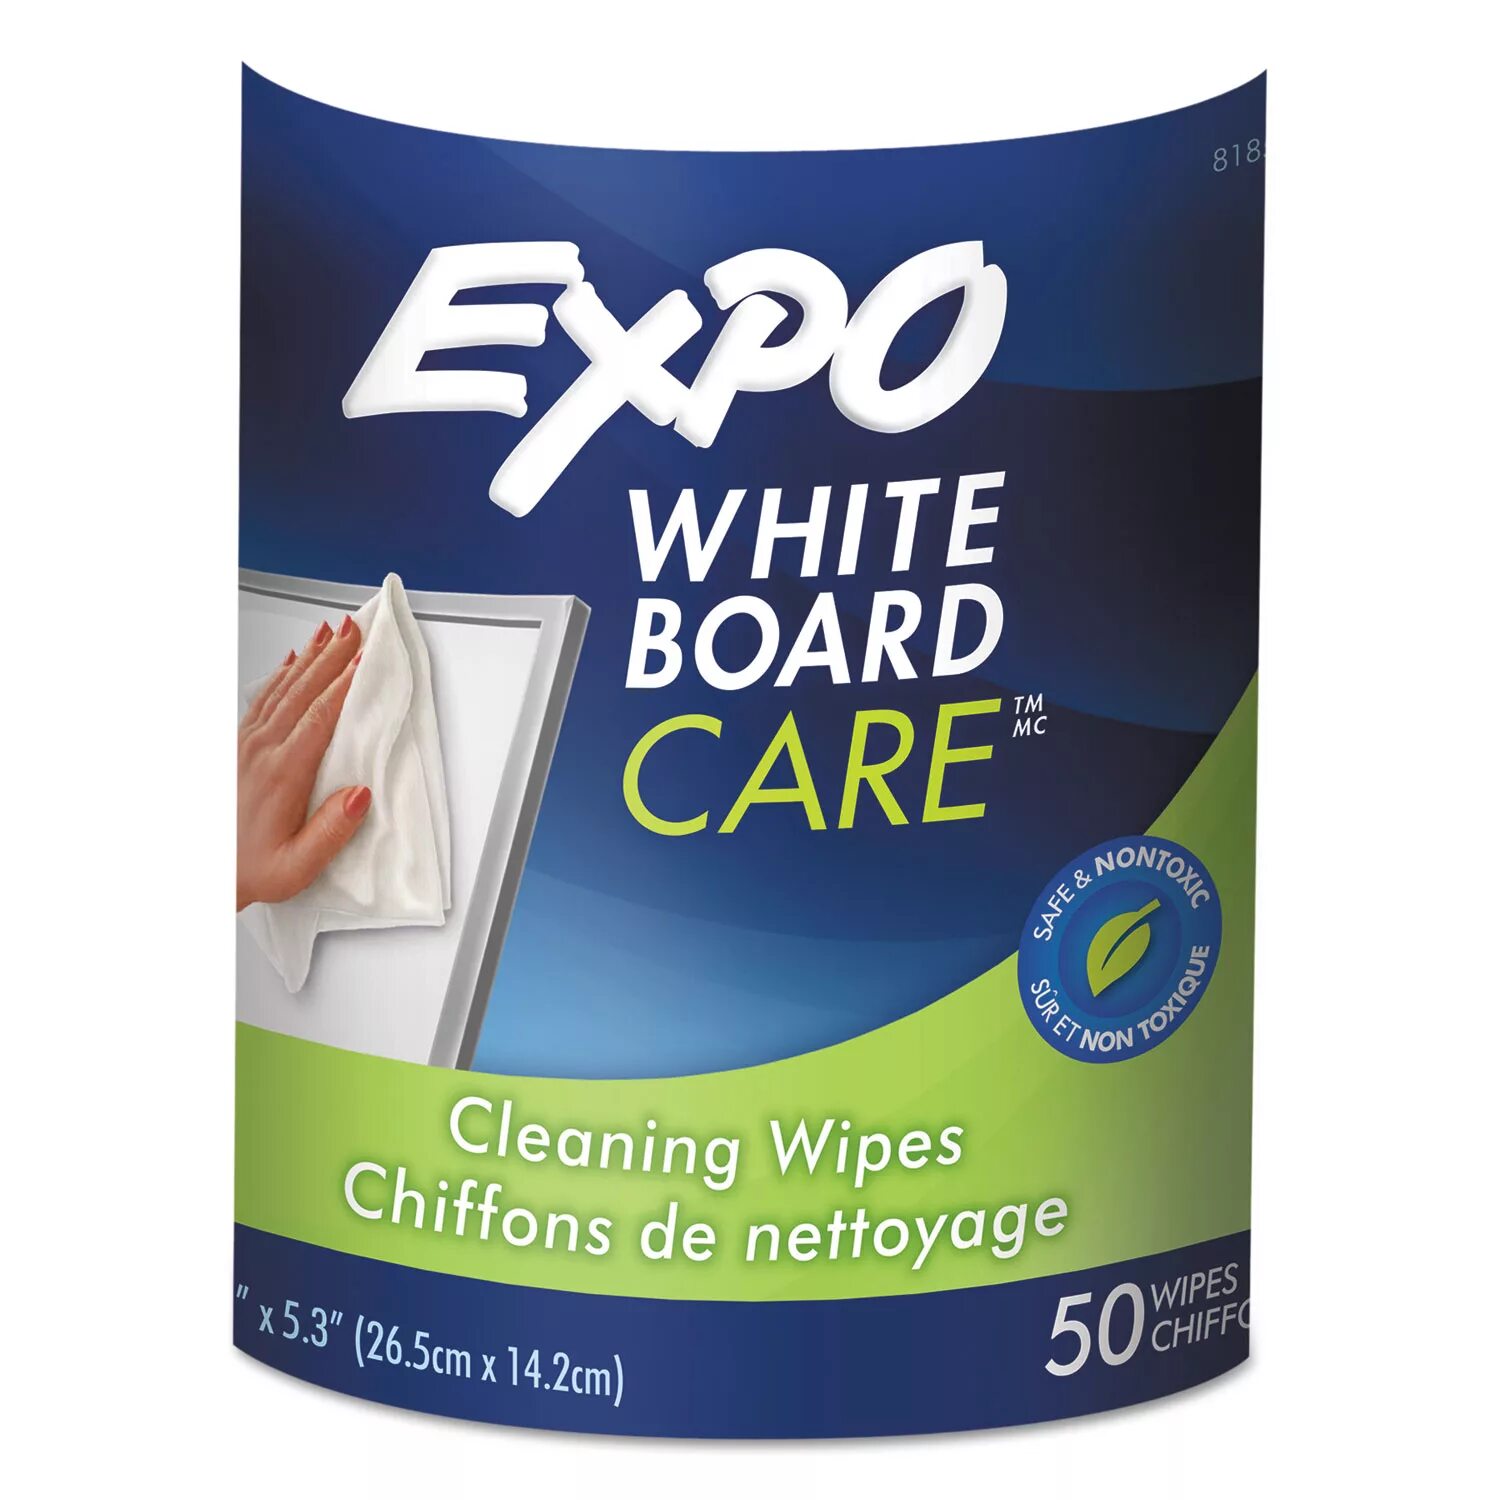 Wipe clean. Cleaning wipes. Прокладки clean and clean. Dry wipe Boards. Clean the Board.